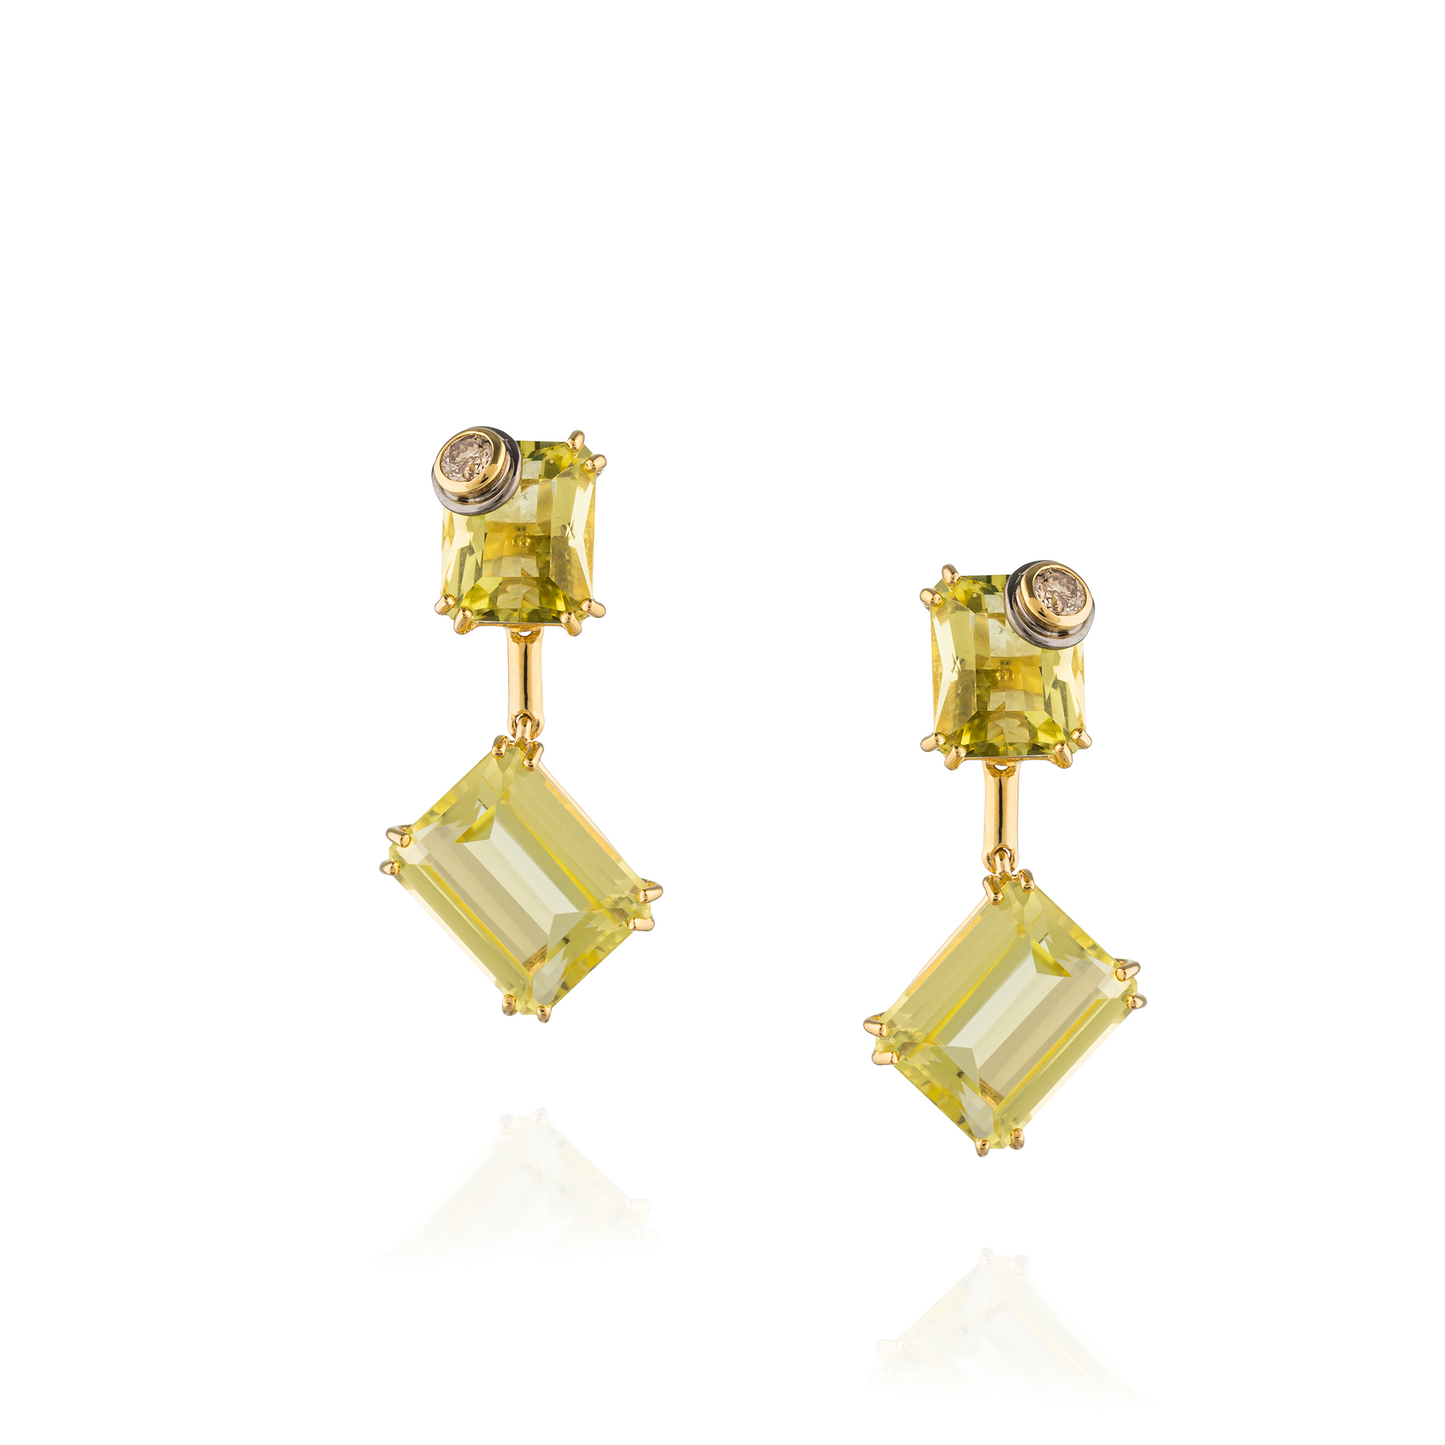 925 Silver Earrings 18KT Yellow Gold Plated with a Square Faceted Lemmon Quartz